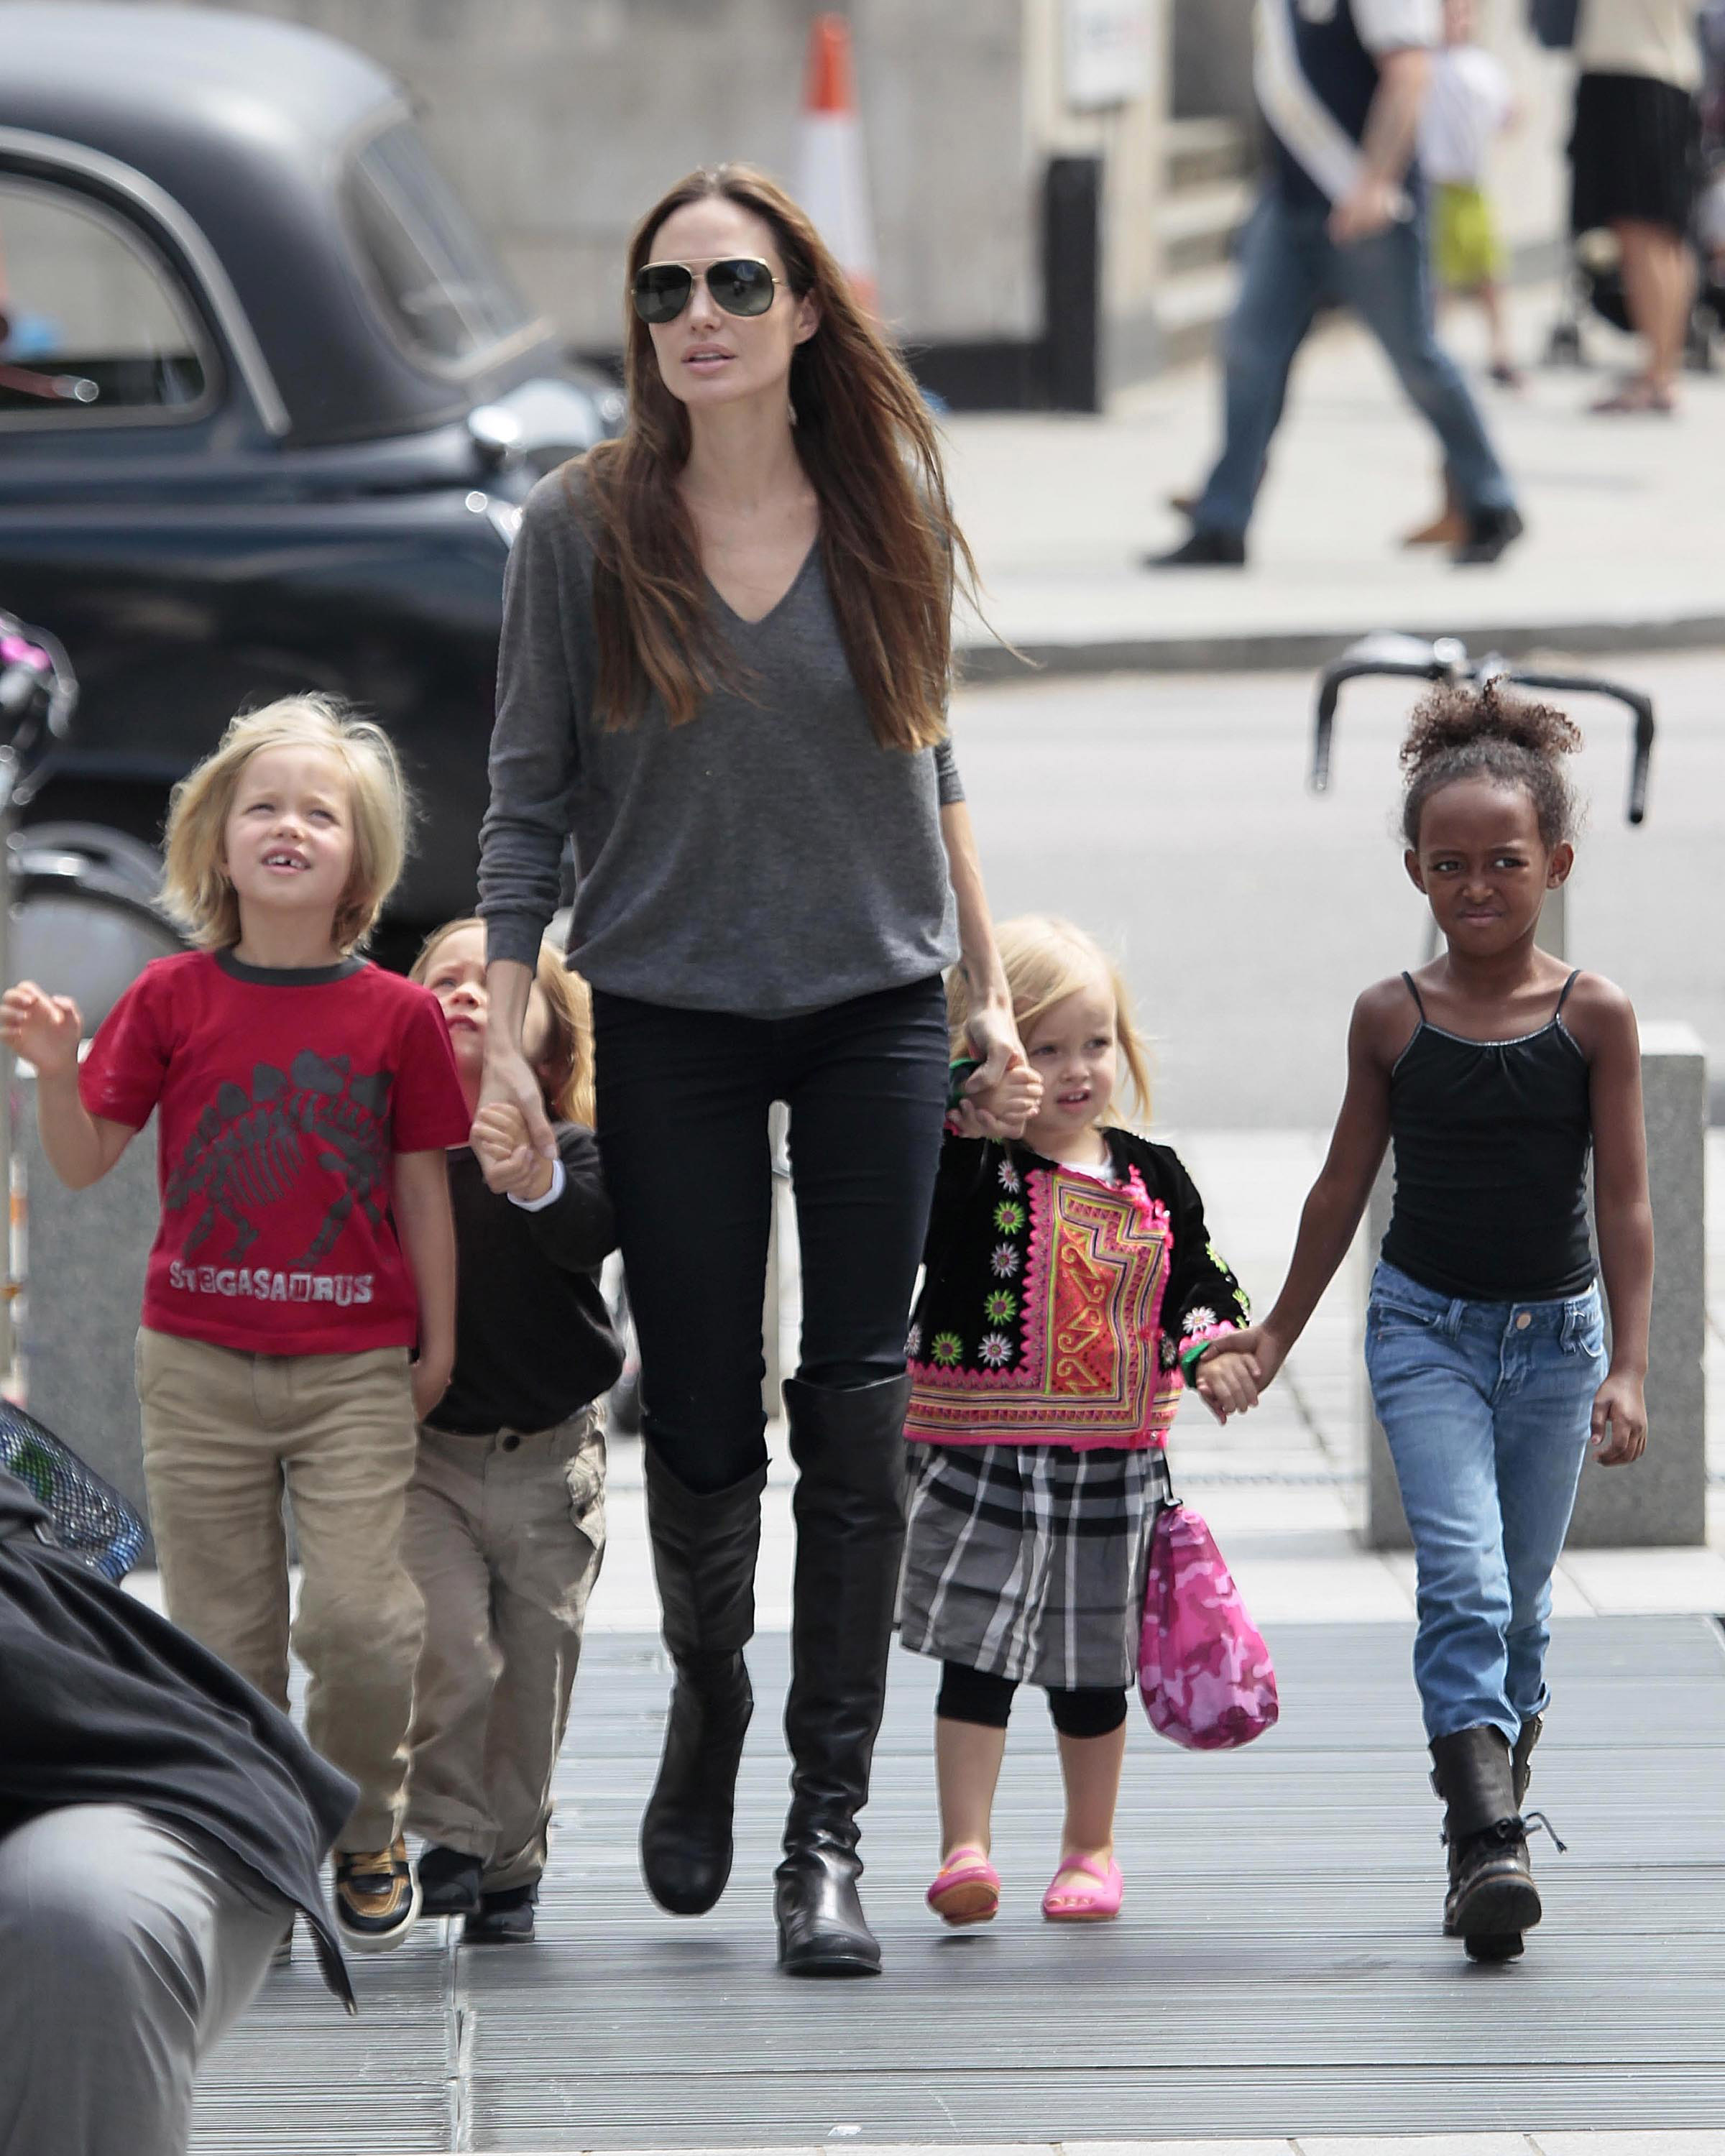 Angelina Jolie sighted arriving at The London Aquarium with her children Shiloh, Knox, Vivienne and Zahara on July 25, 2011 in London, England | Source: Getty Images